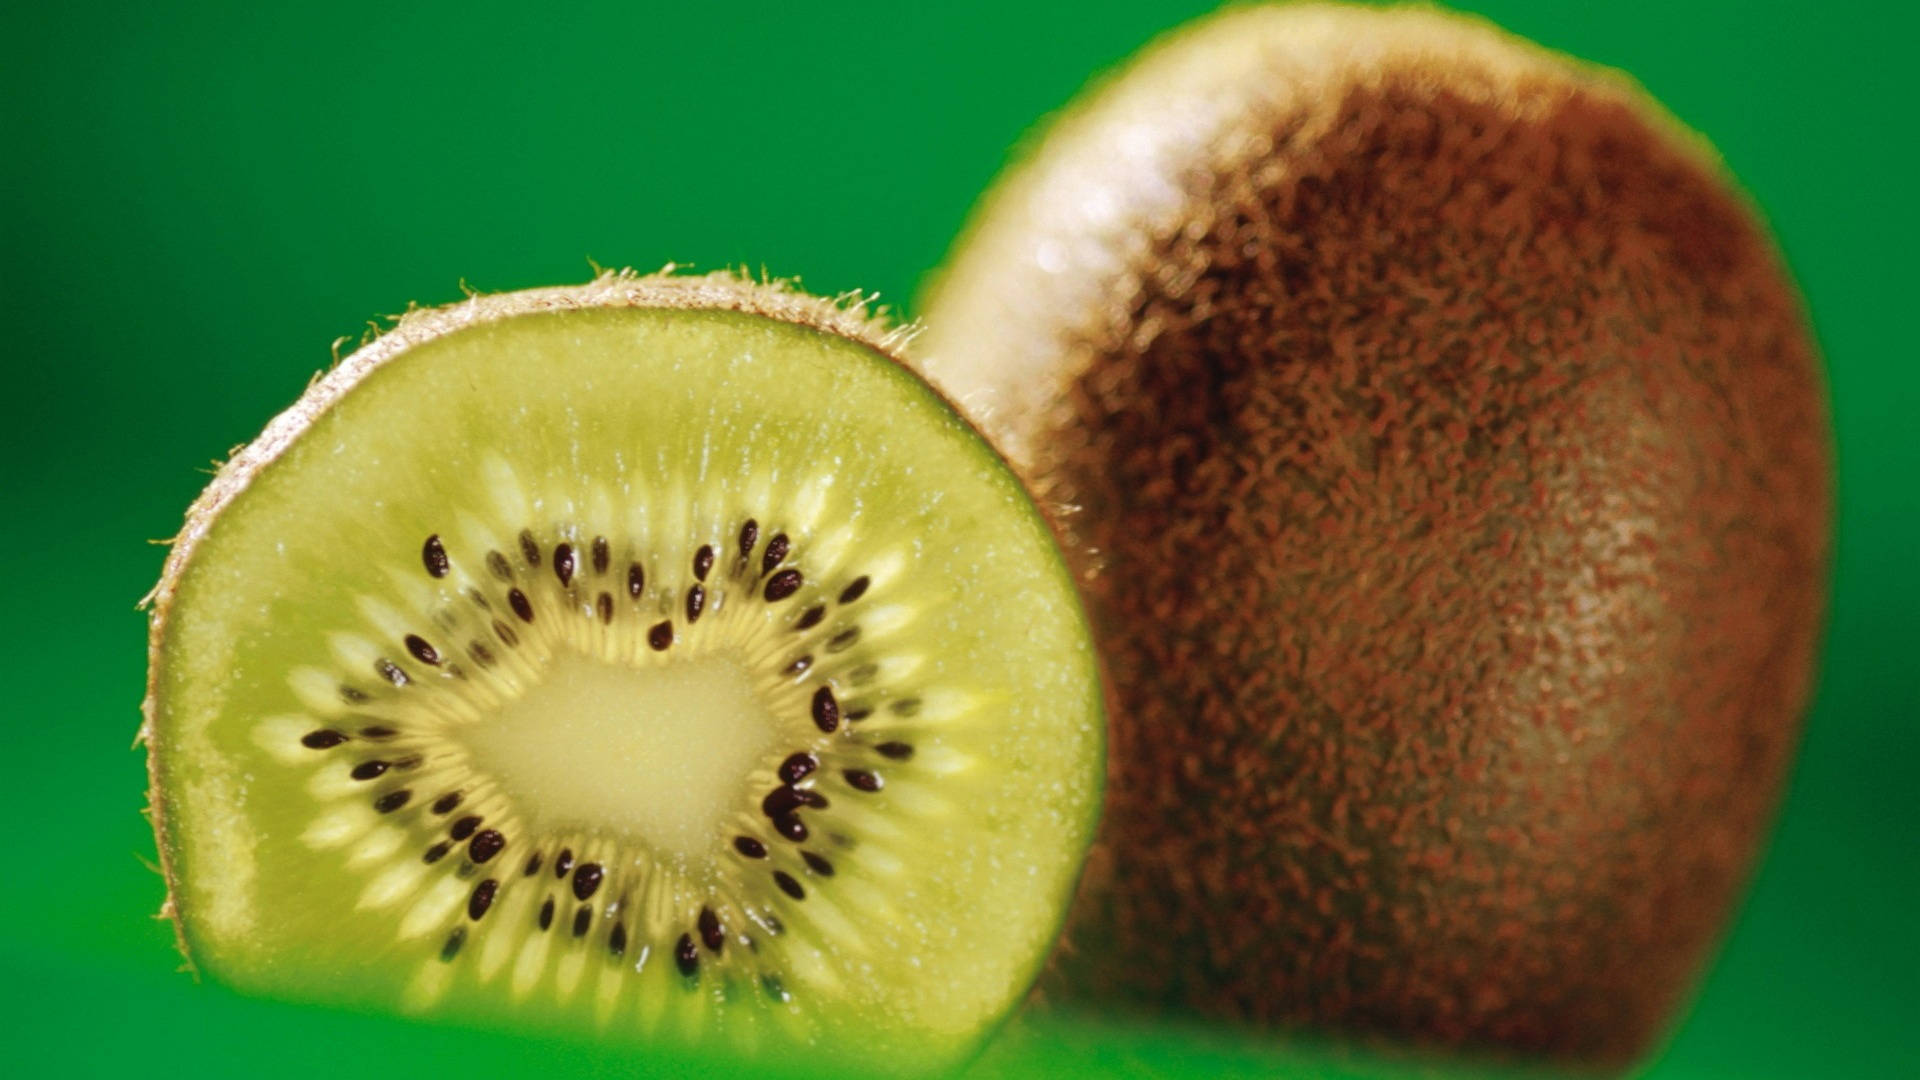 A Stark Hd Photo Of A Brown Skin Kiwi Fruit And A Kiwi Cut In Half Showing Its Whitish-green Core